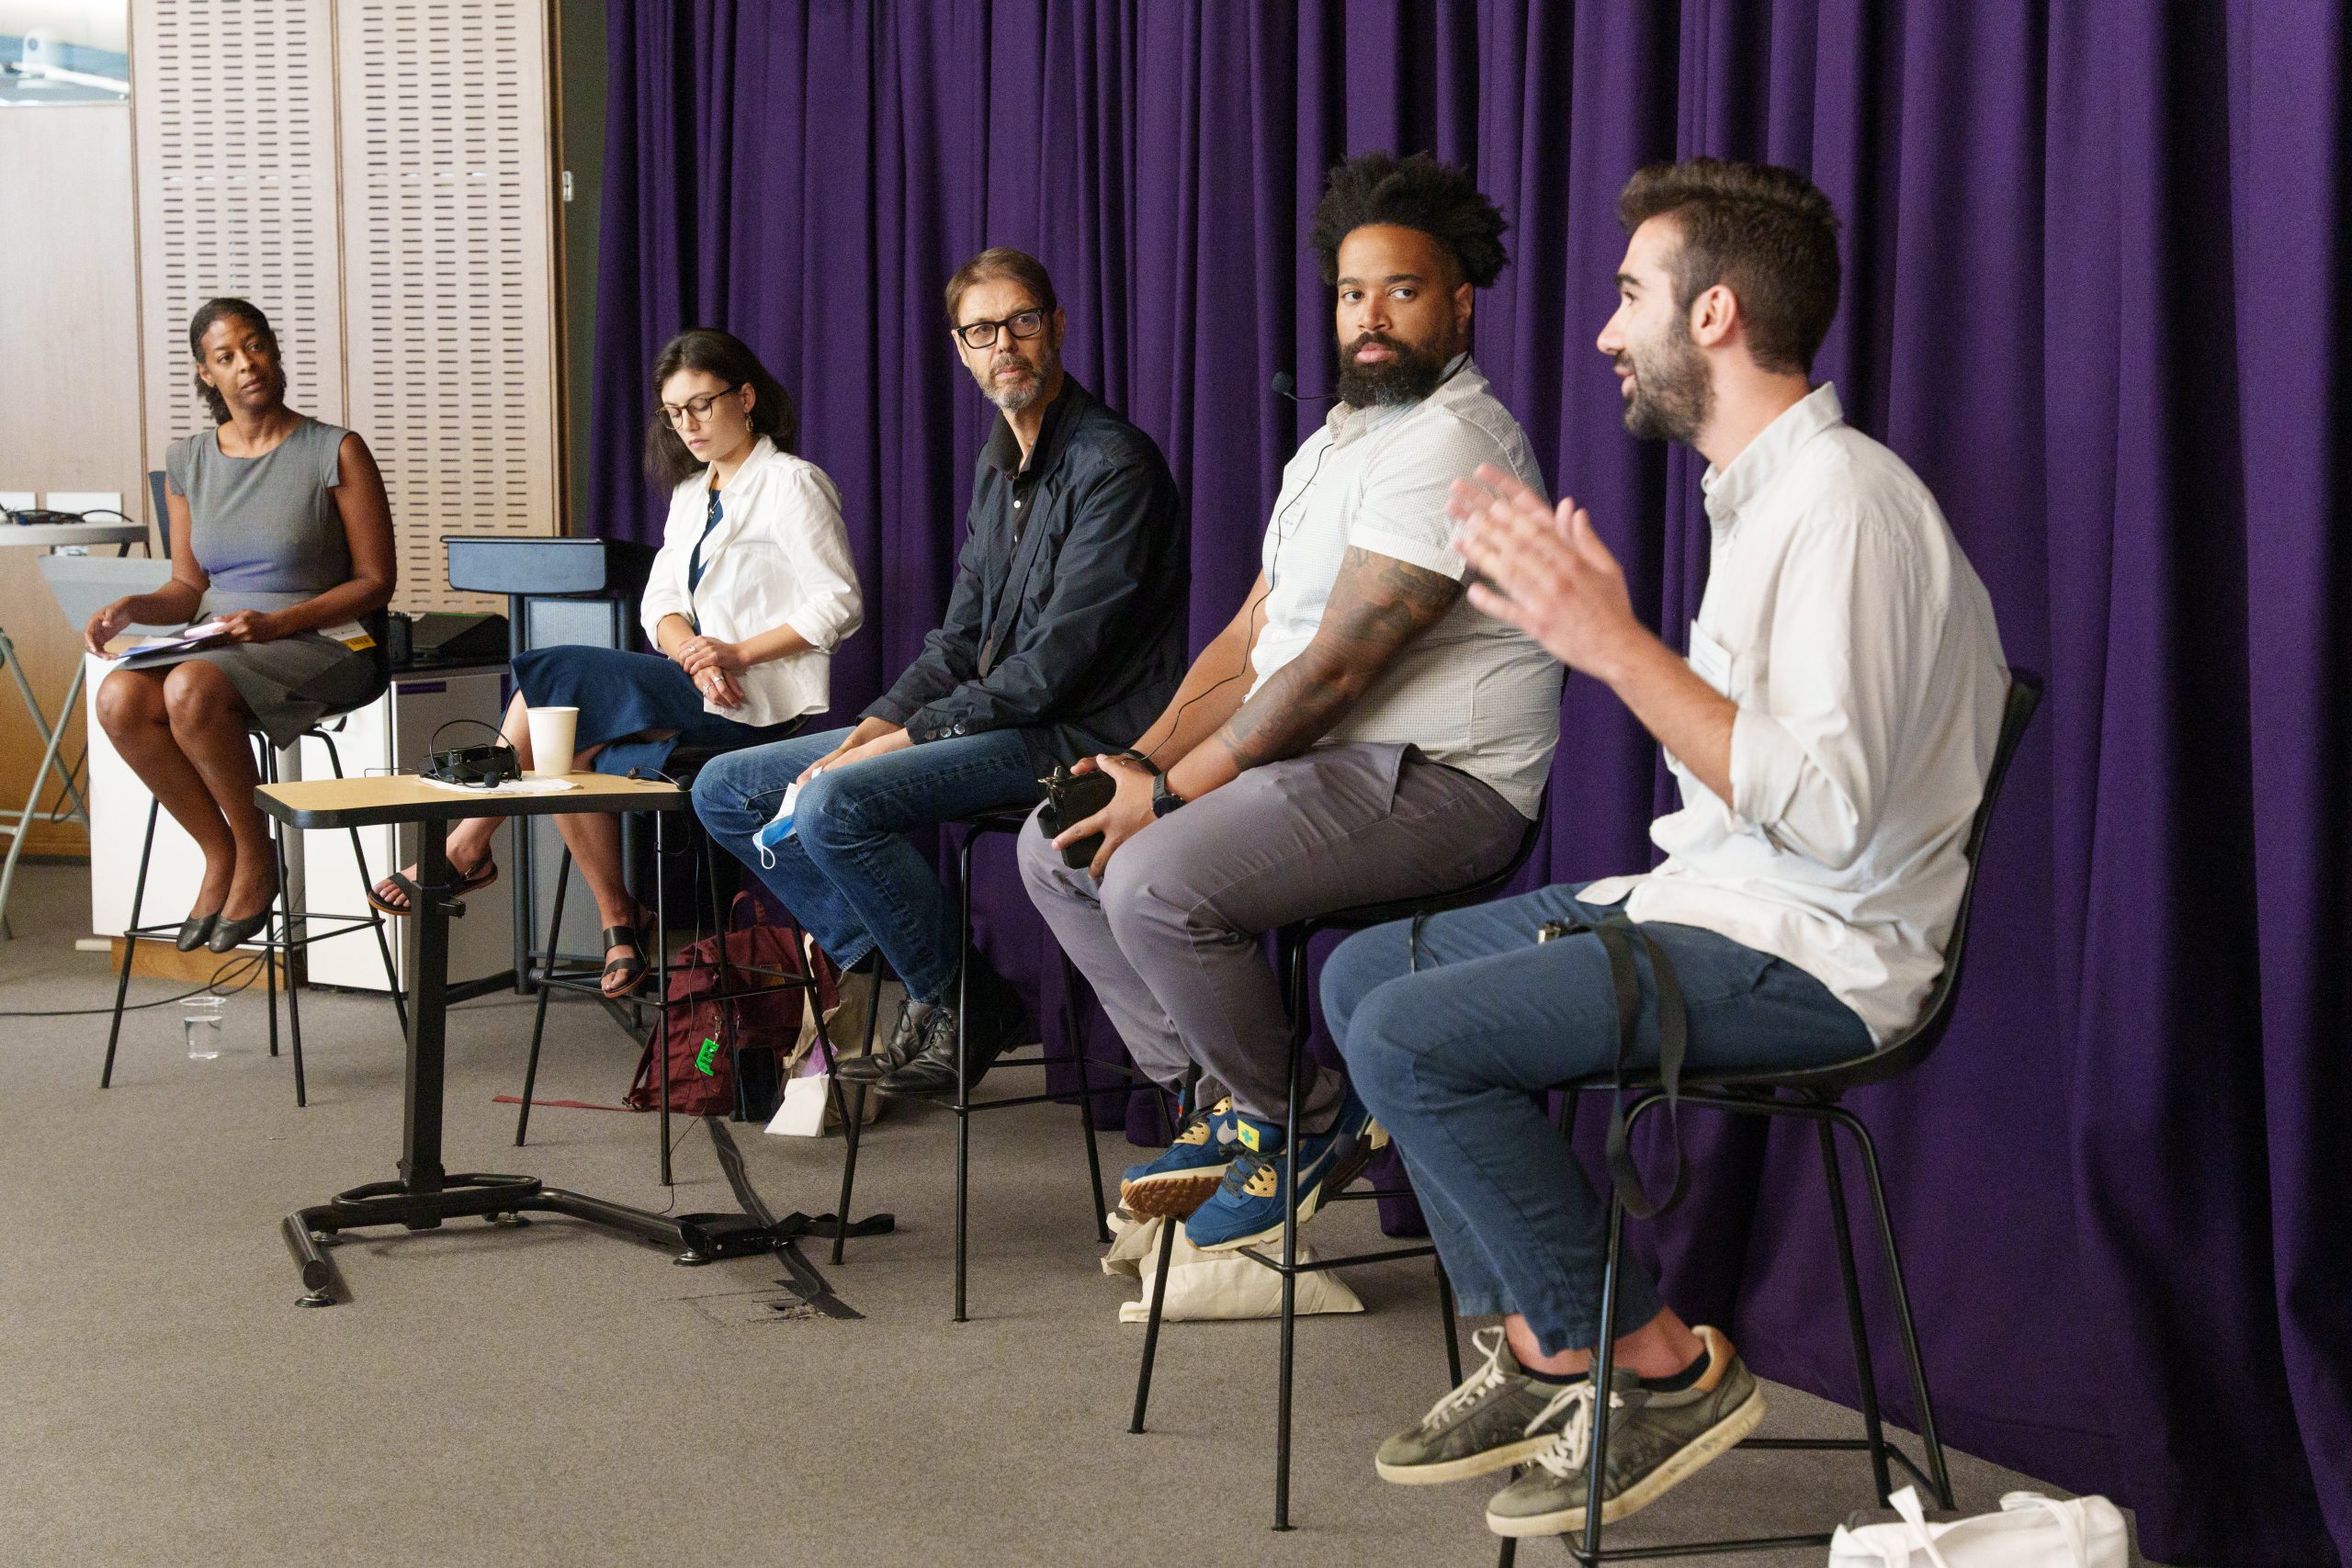 PhD students and faculty seated on stools on a discussion panel